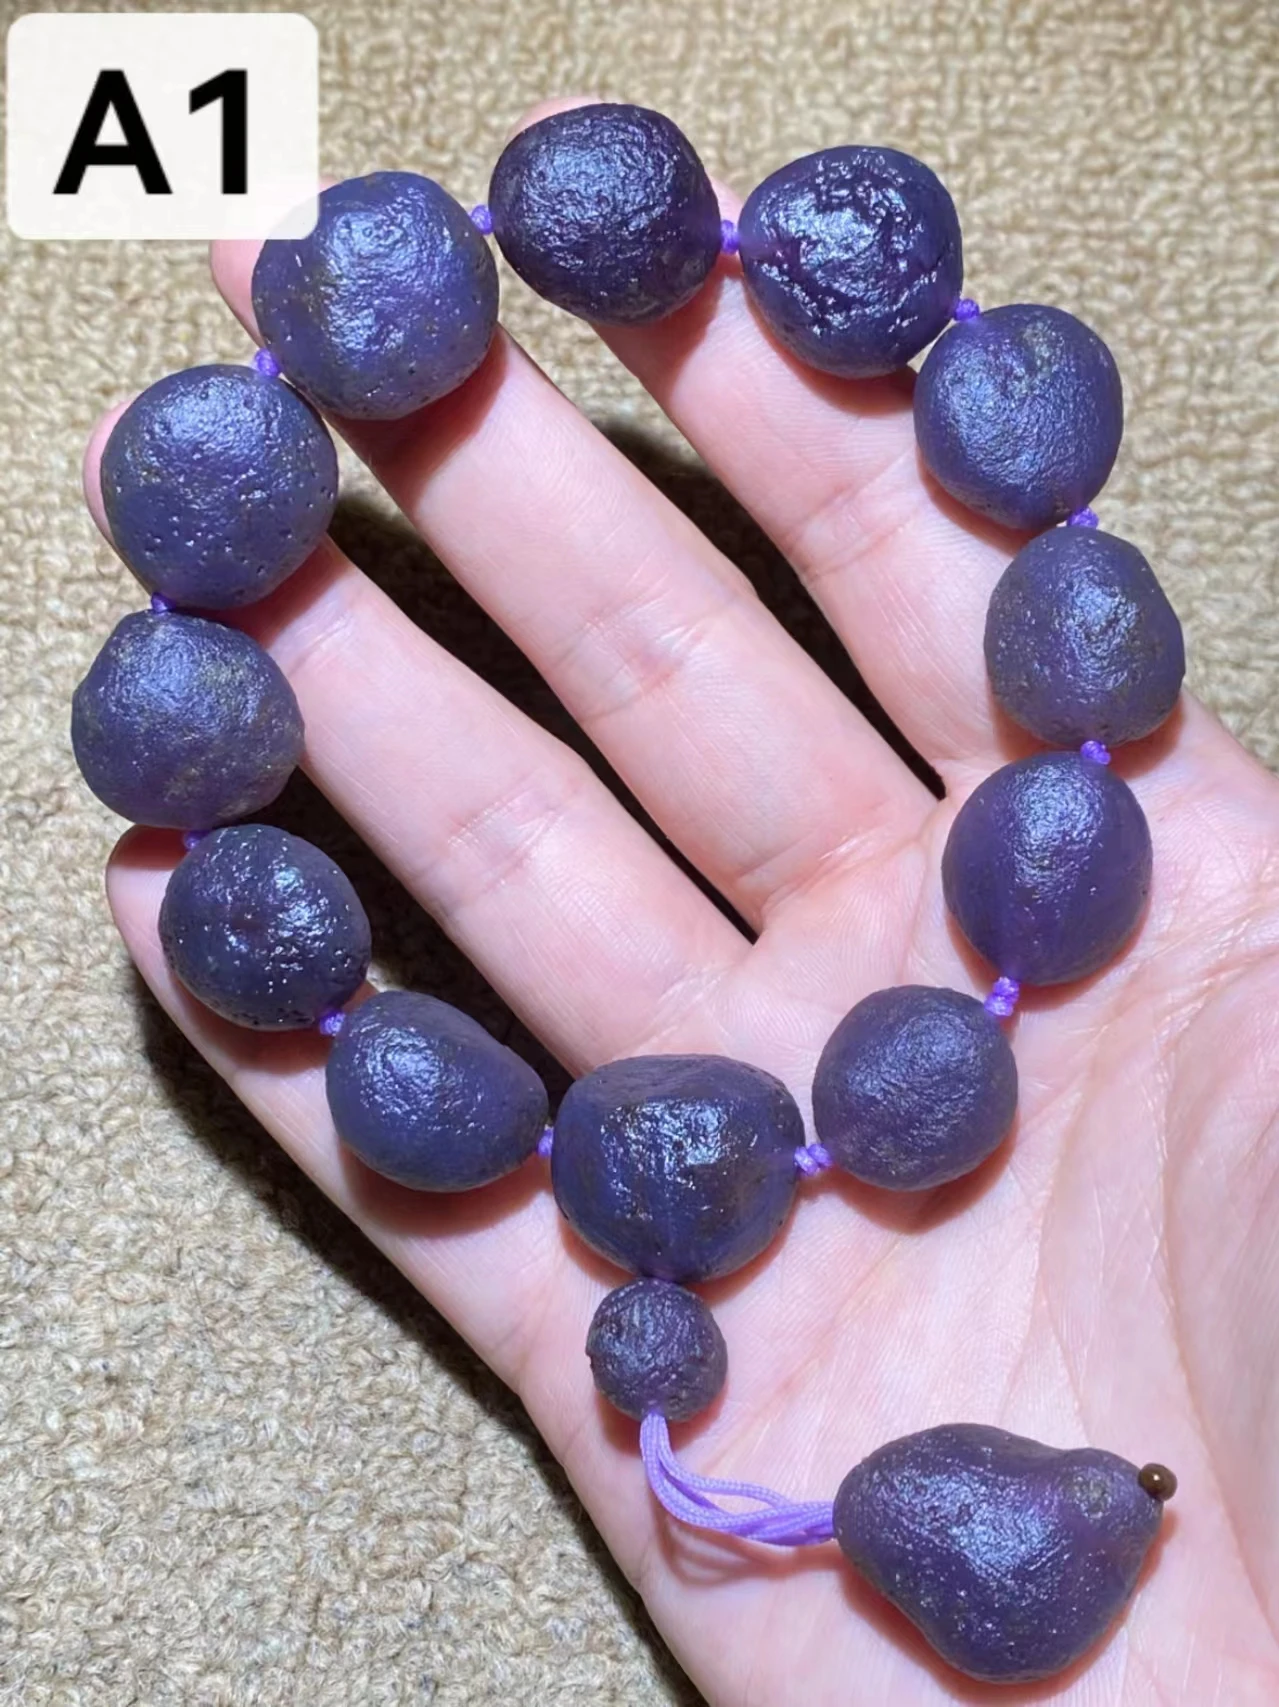 

1pcs/lot Rare Collectible Noble Mystery Violet Gobi Agate Rough Stone Bracelet limited edition without any artificial treatment